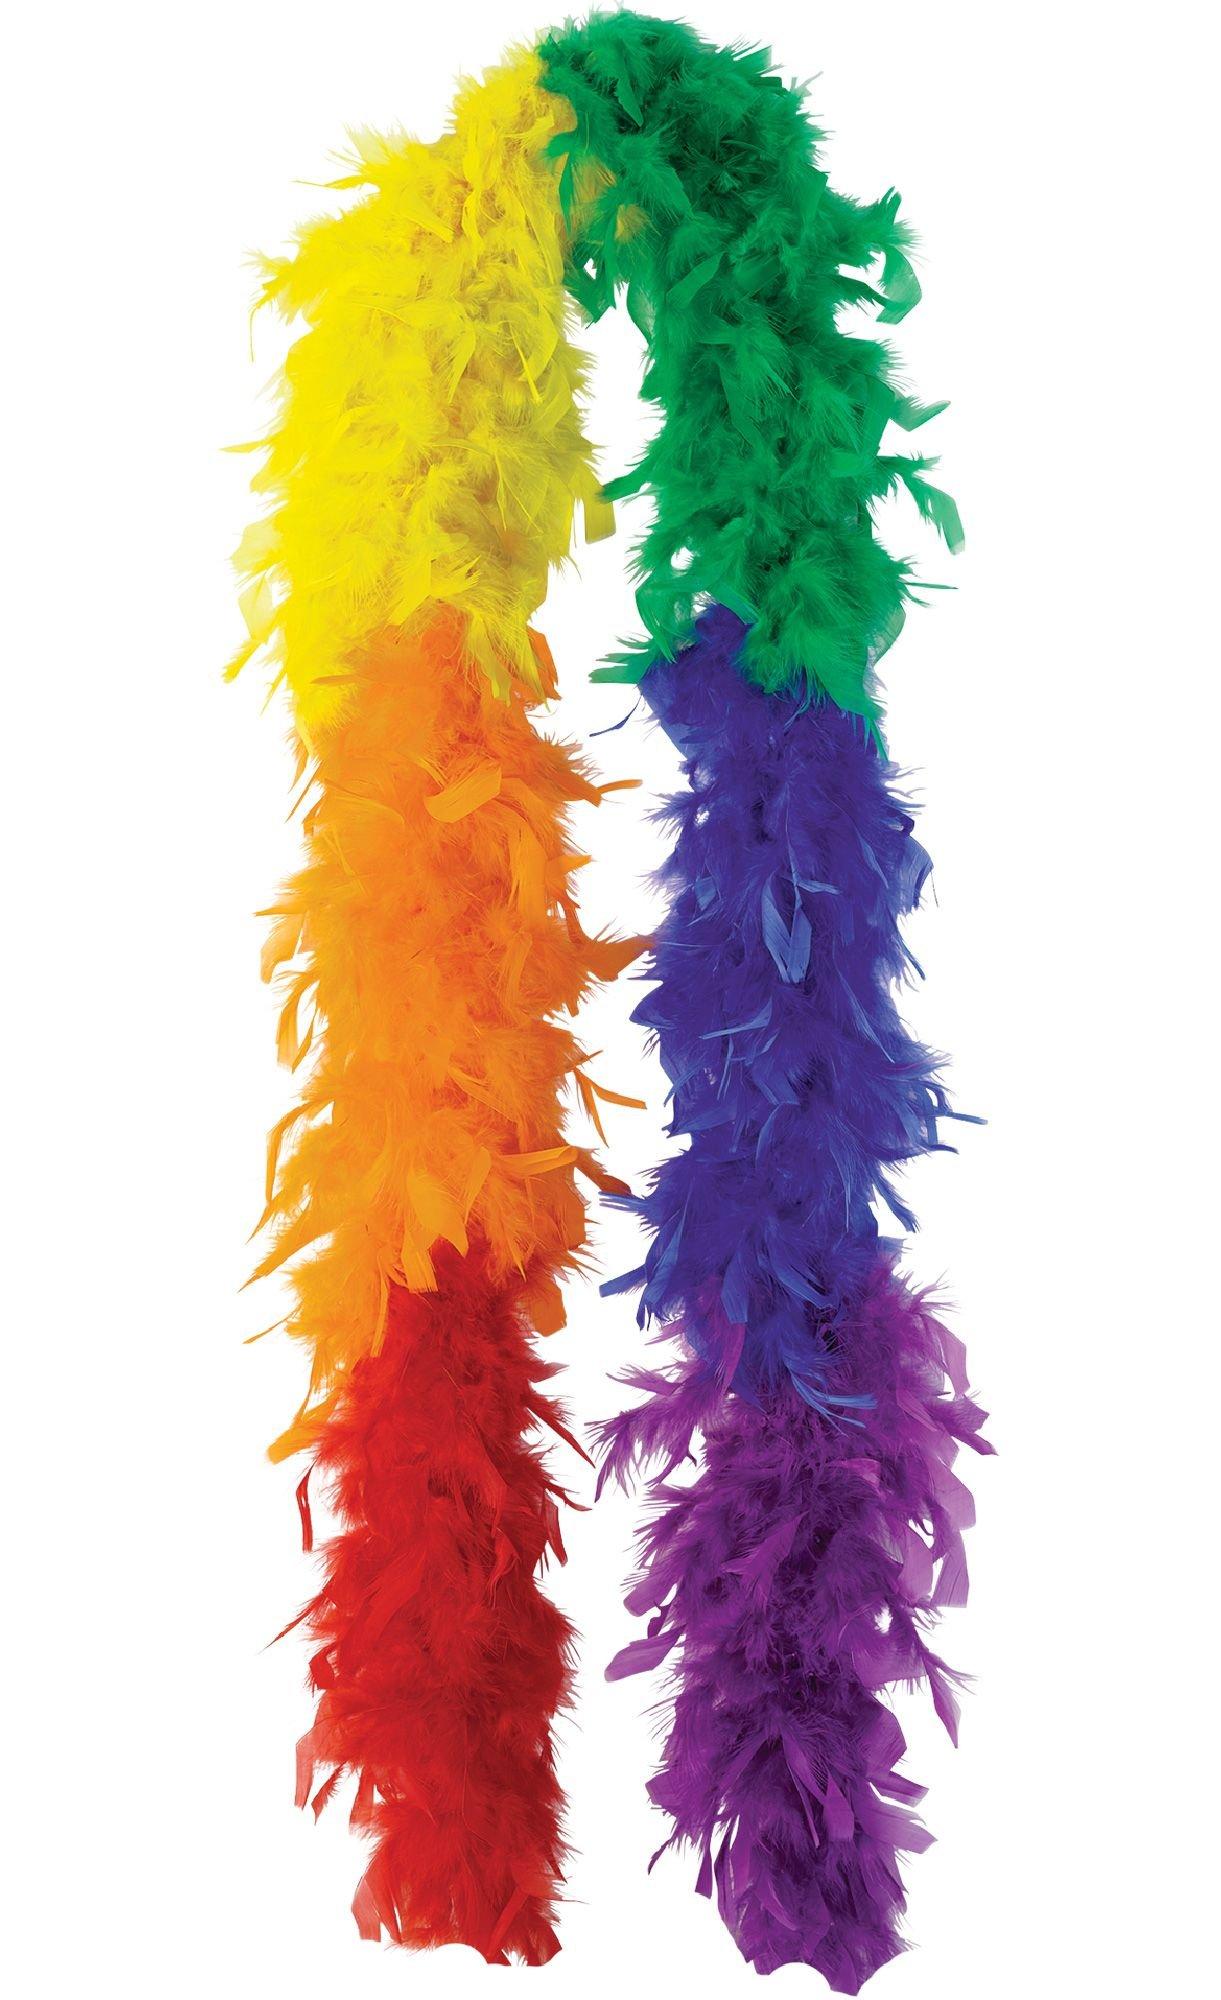 Ultimate Party Supplies Rainbow Feather Boas - 6 Pack of 6 Feet Long Boas  with Feathers - Perfect for Pride Outfits, Halloween Costumes, and Party